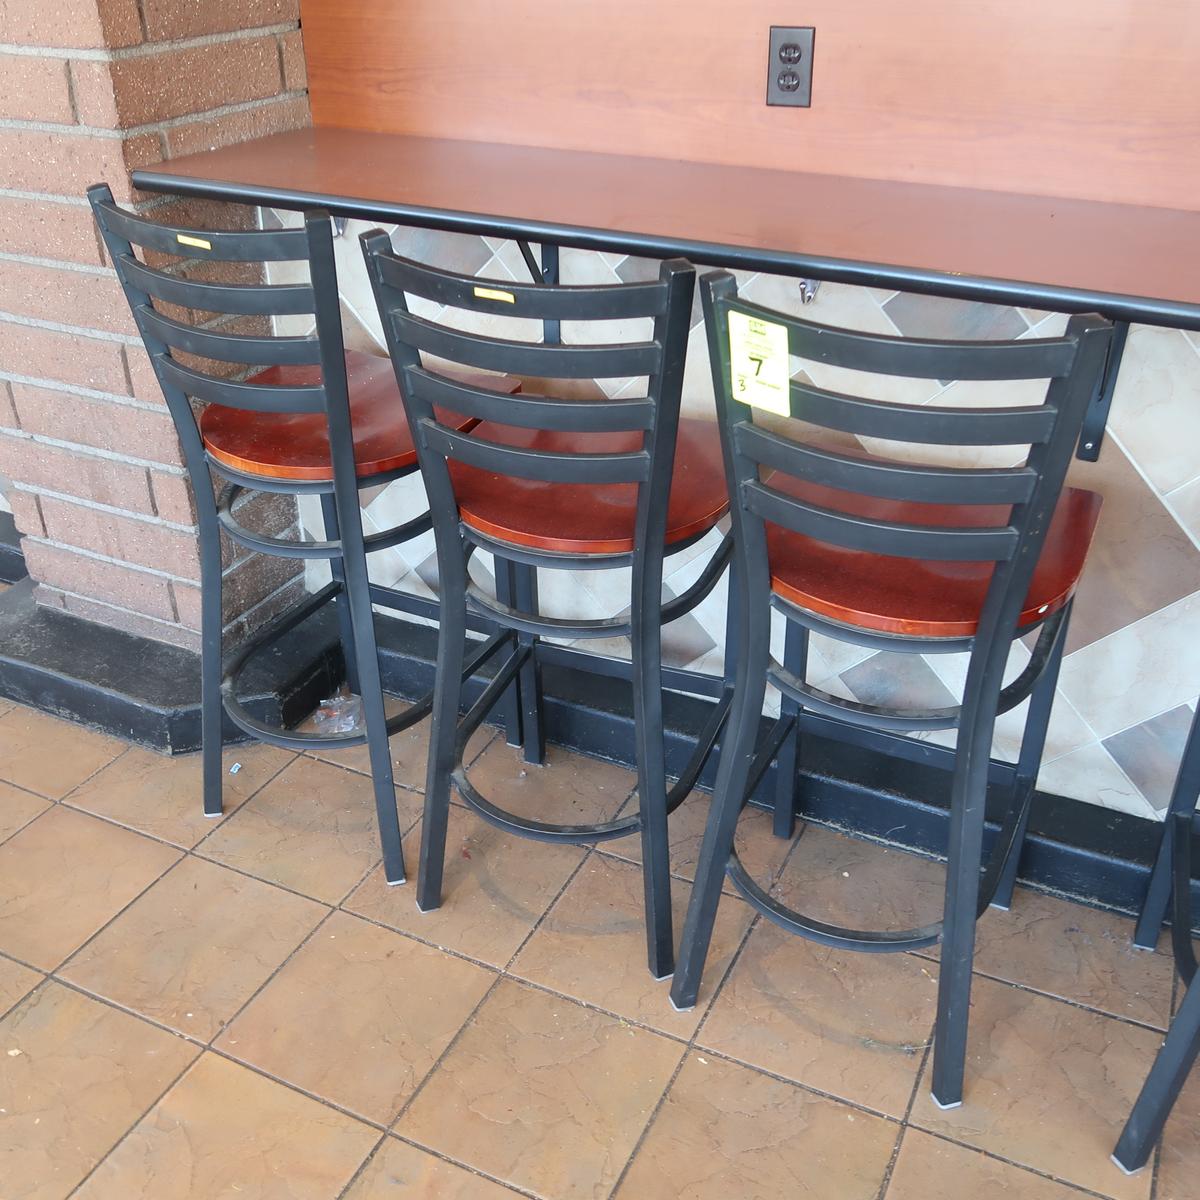 stools, steel frame w/wooden seats, bar-height